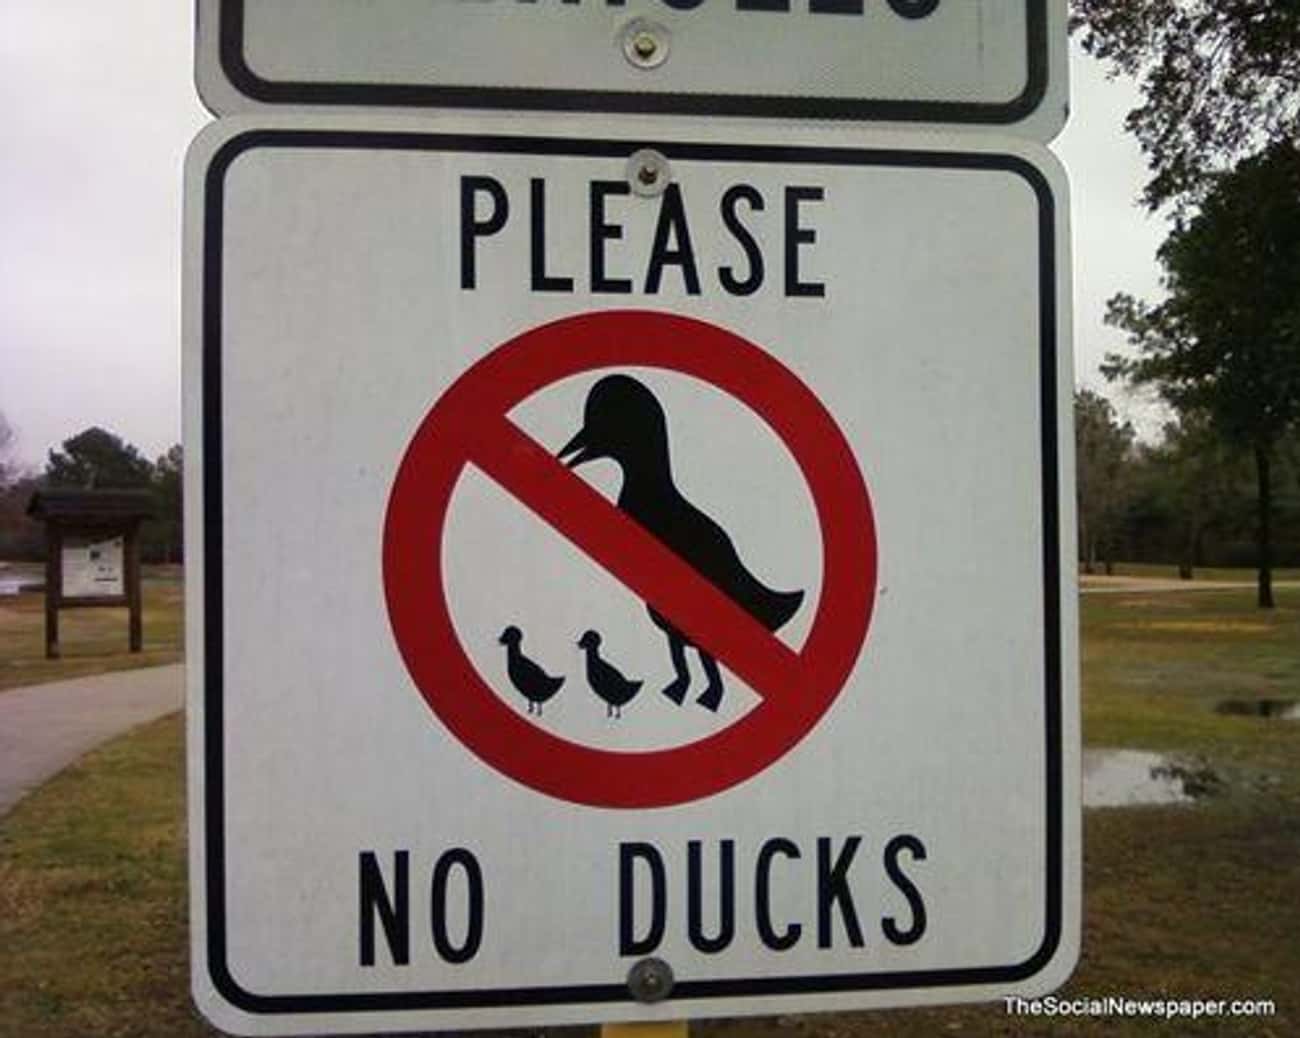 What the Duck?